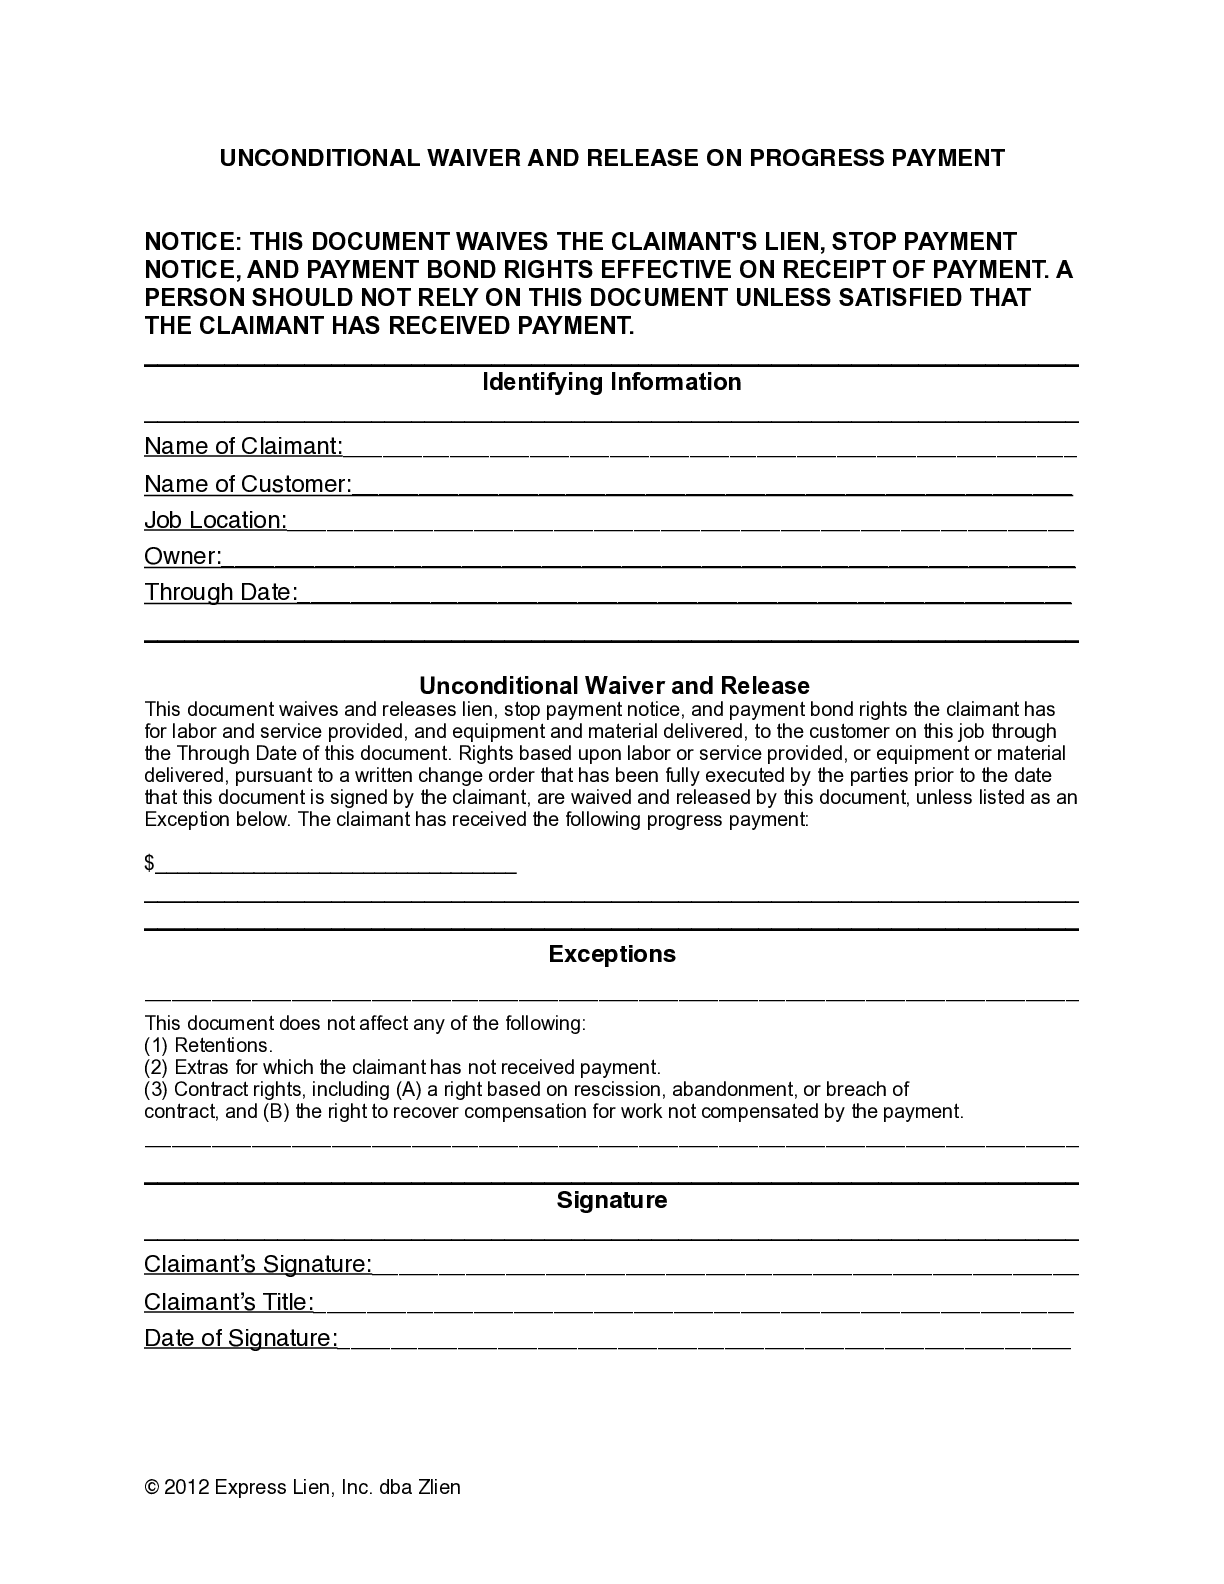 Delaware Partial Unconditional Lien Waiver Form - free from